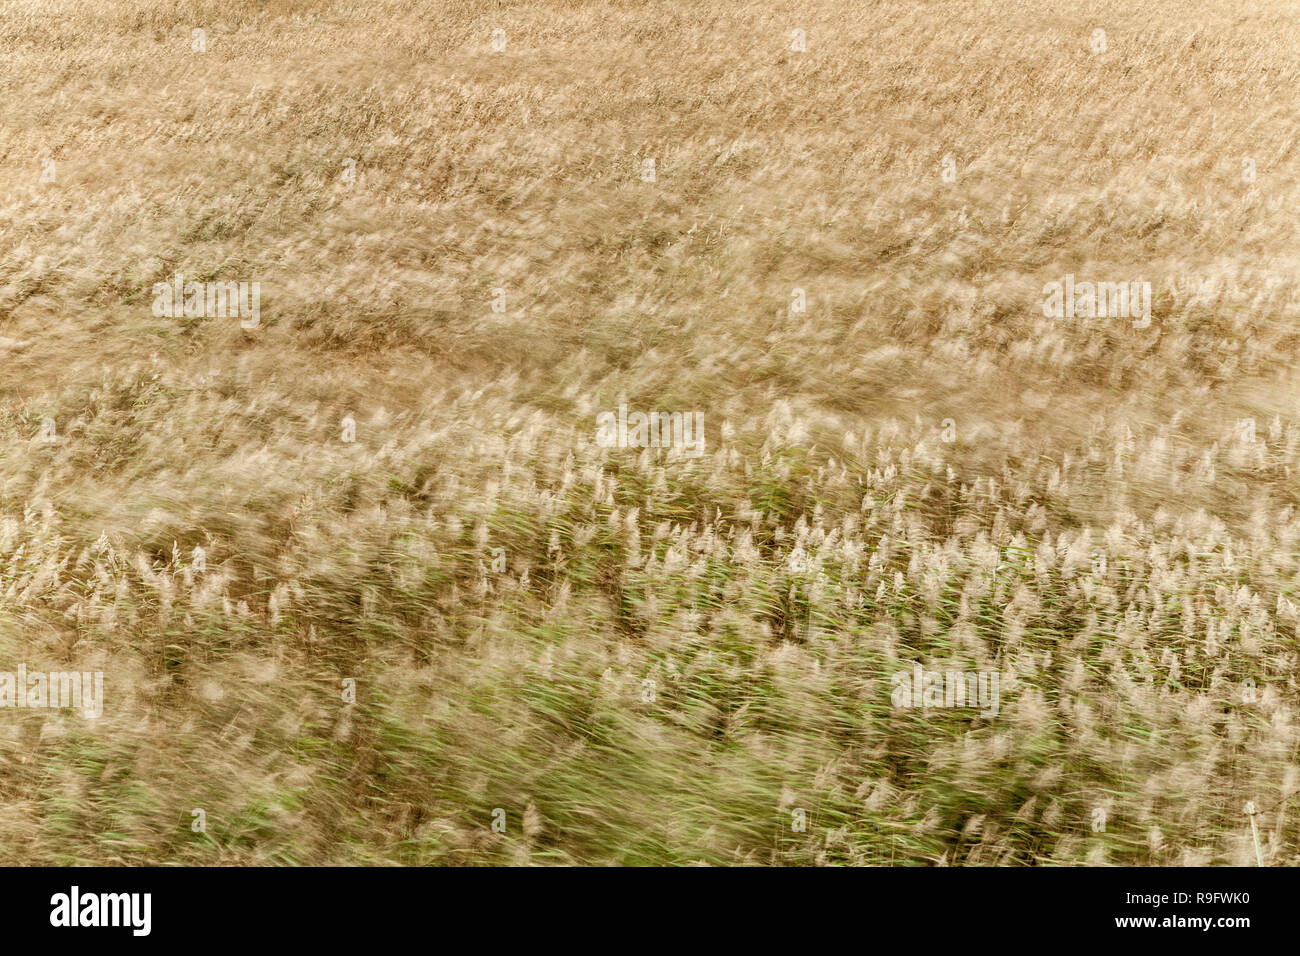 Reeds blowing in the wind; Cornwall Stock Photo